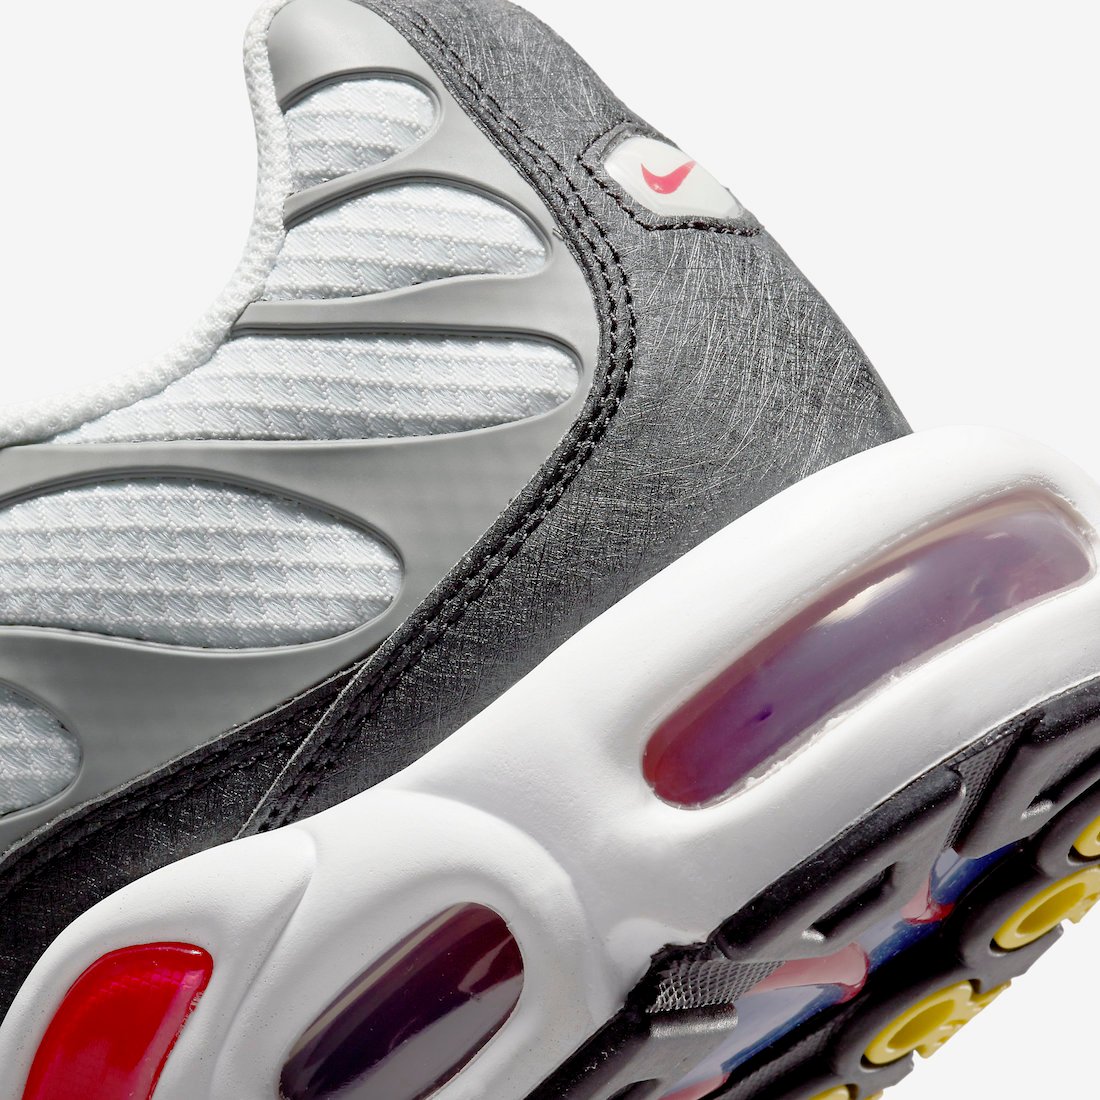 Nike Air Max Plus White Grey Black Red DM0032-002 Release Date Info